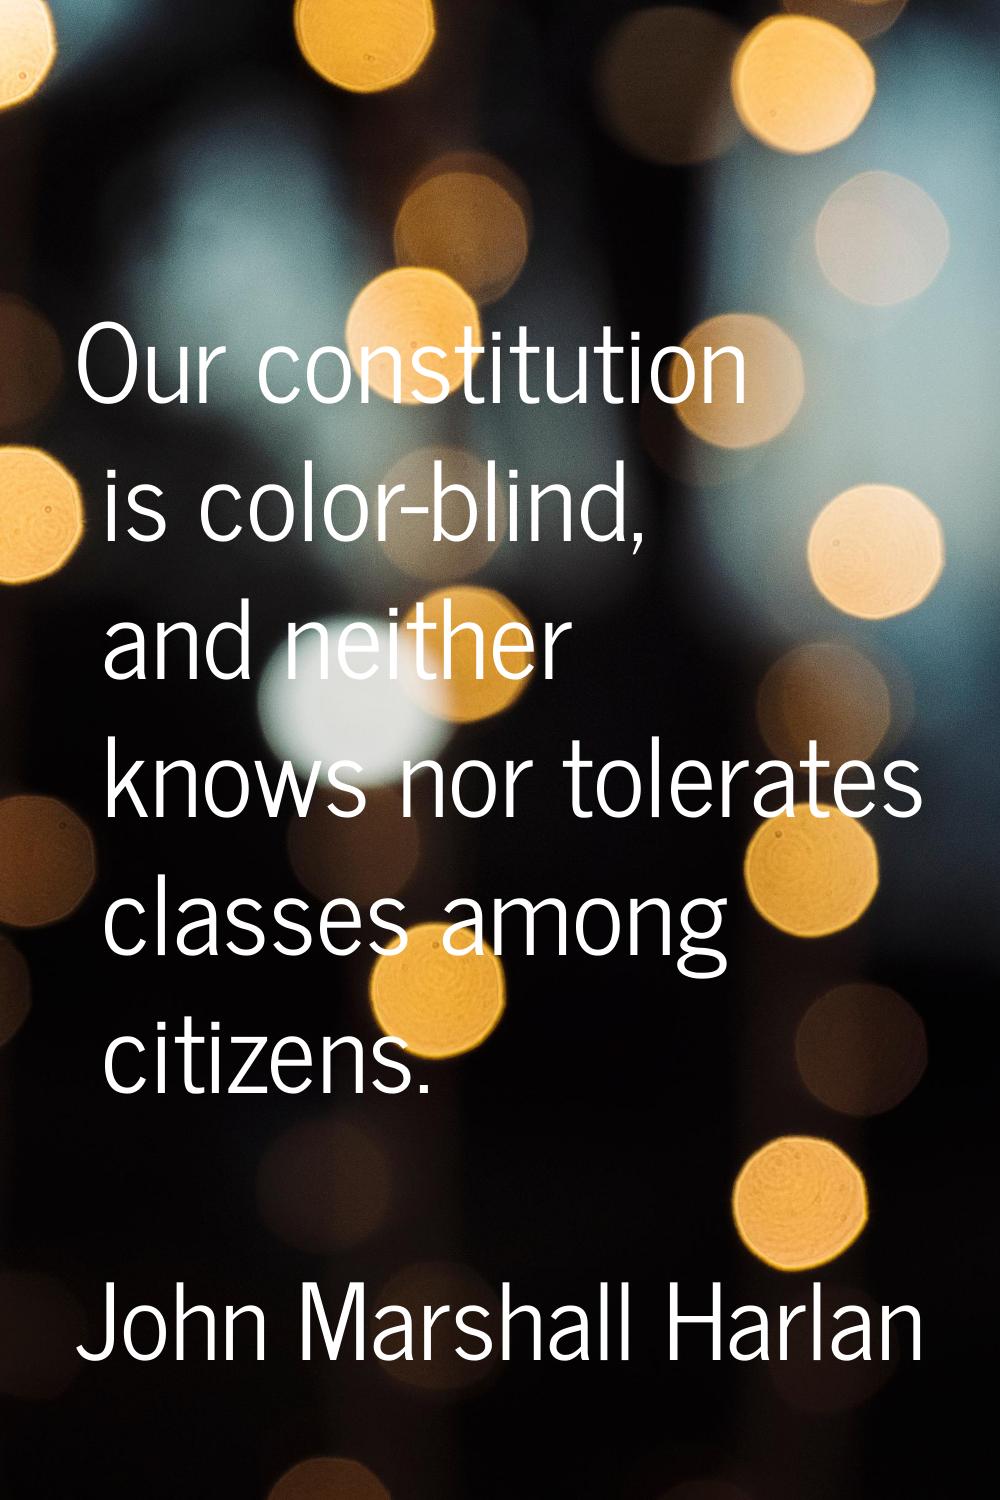 Our constitution is color-blind, and neither knows nor tolerates classes among citizens.